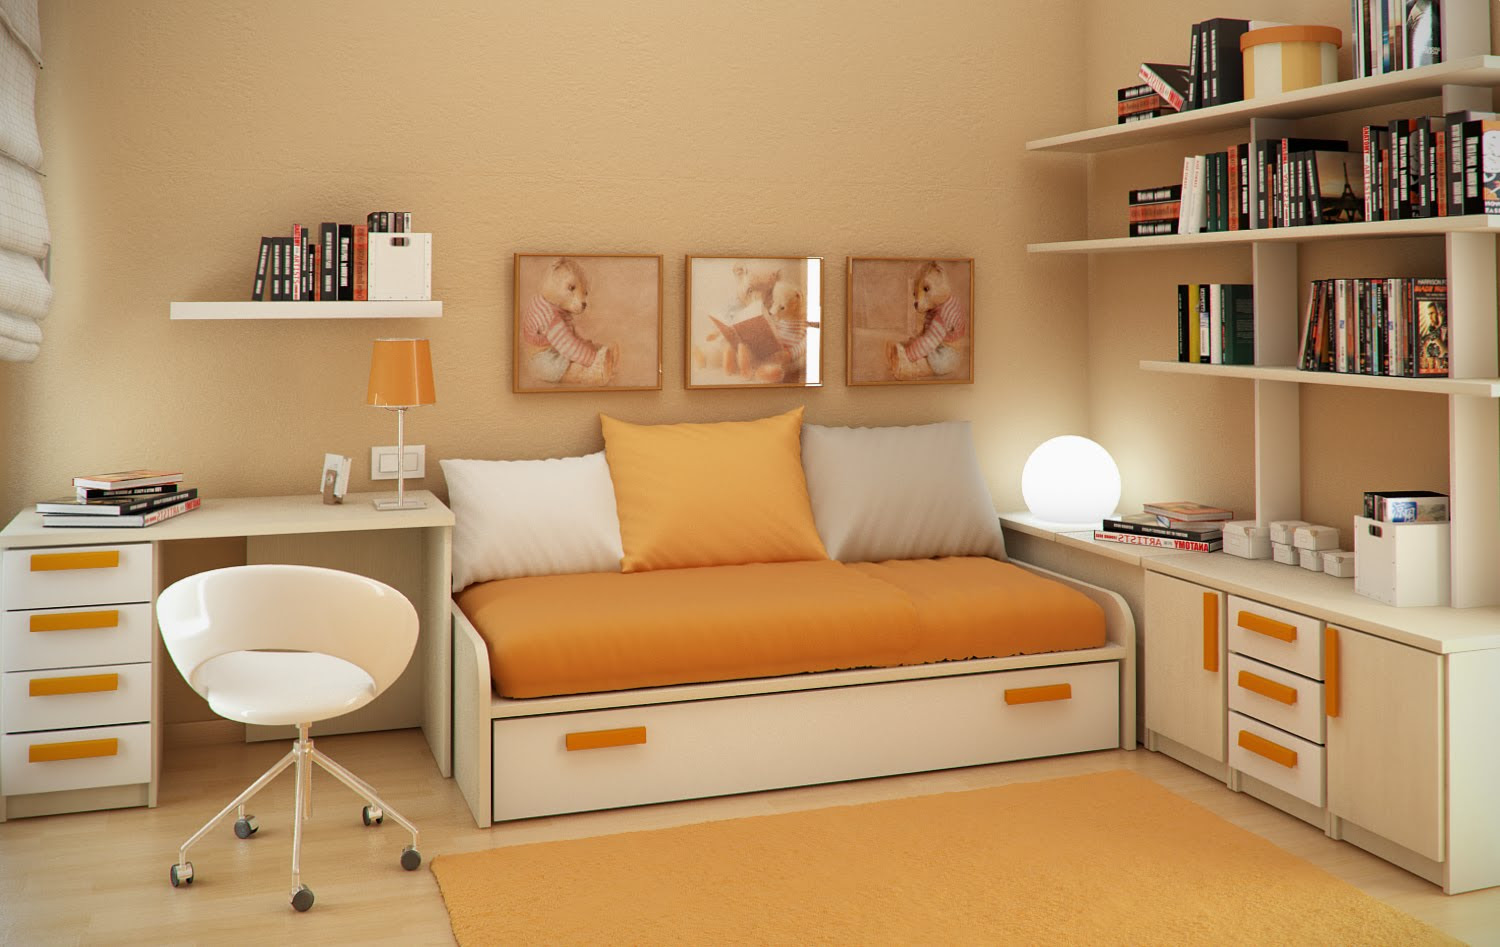 ... works here space saving ideas for small kids rooms kids room designs